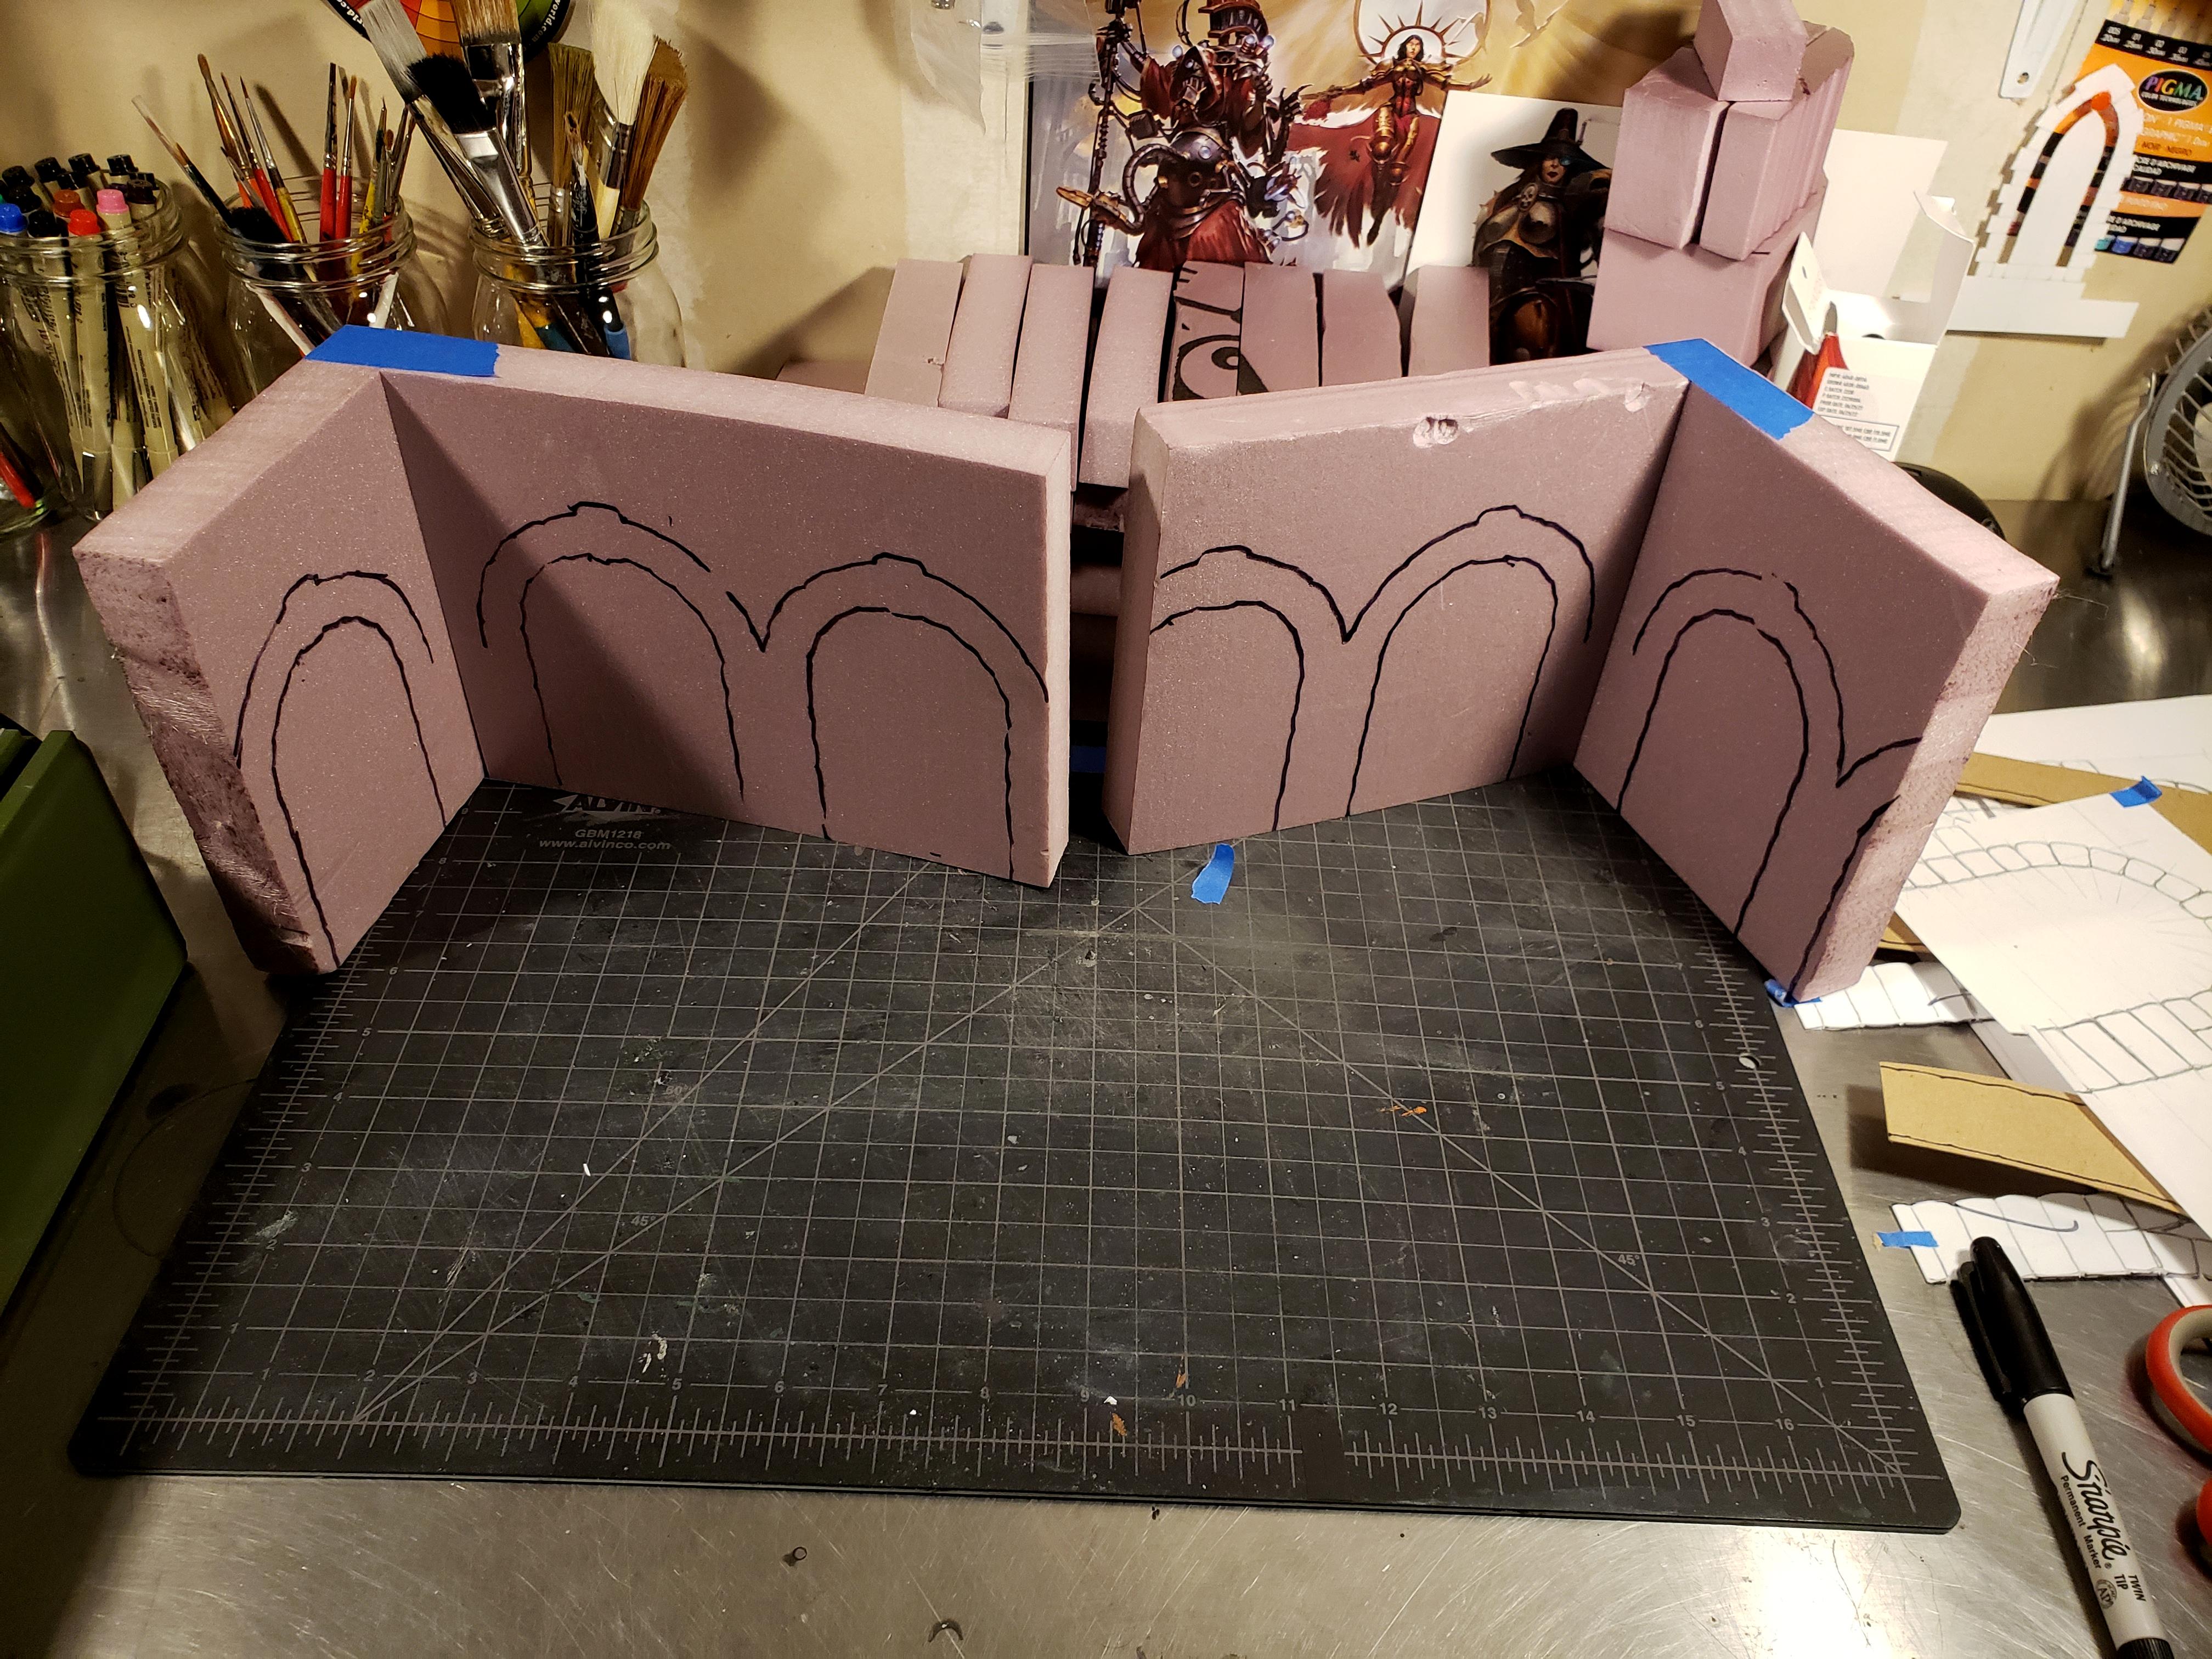 Dry-fitting the panels before I cut and texture them